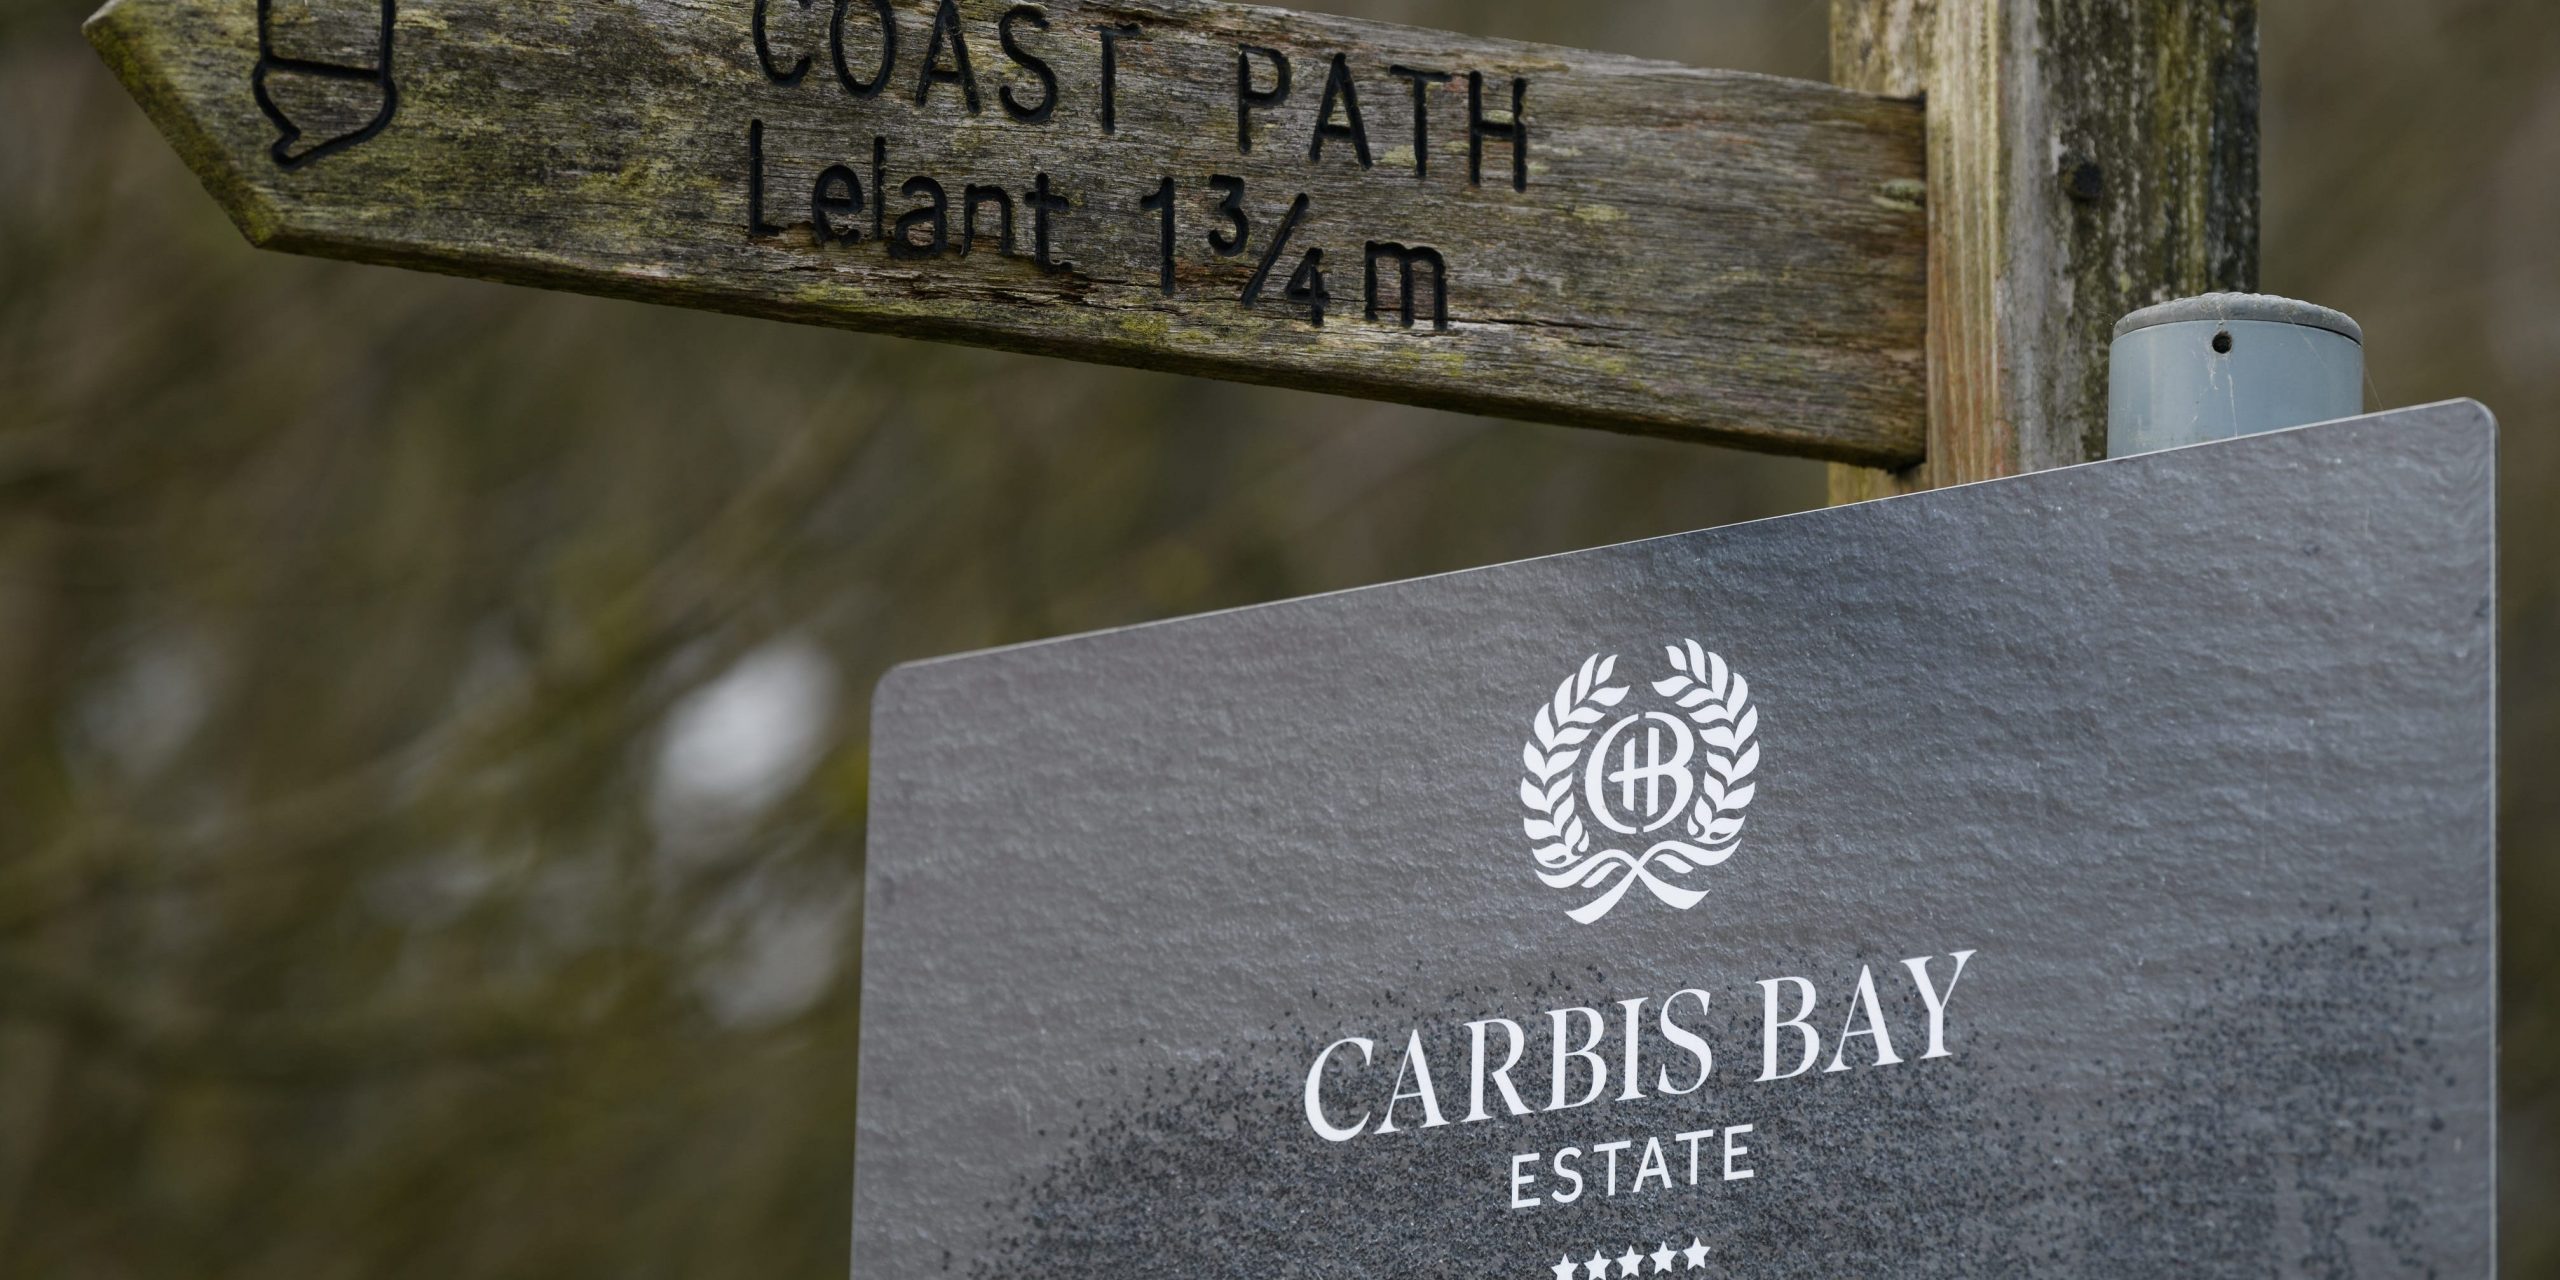 A signpost is seen at the Carbis Bay Estate hotel and beach, set to be the main venue for the upcoming G7 summit, on March 02, 2021 in Carbis Bay, Cornwall, United Kingdom. The June summit will be the first face-to-face meeting between G7 leaders since the covid-19 pandemic. G7 countries include the UK, US, Germany, France, Canada, Italy and Japan. (Photo by Leon Neal/Getty Images)